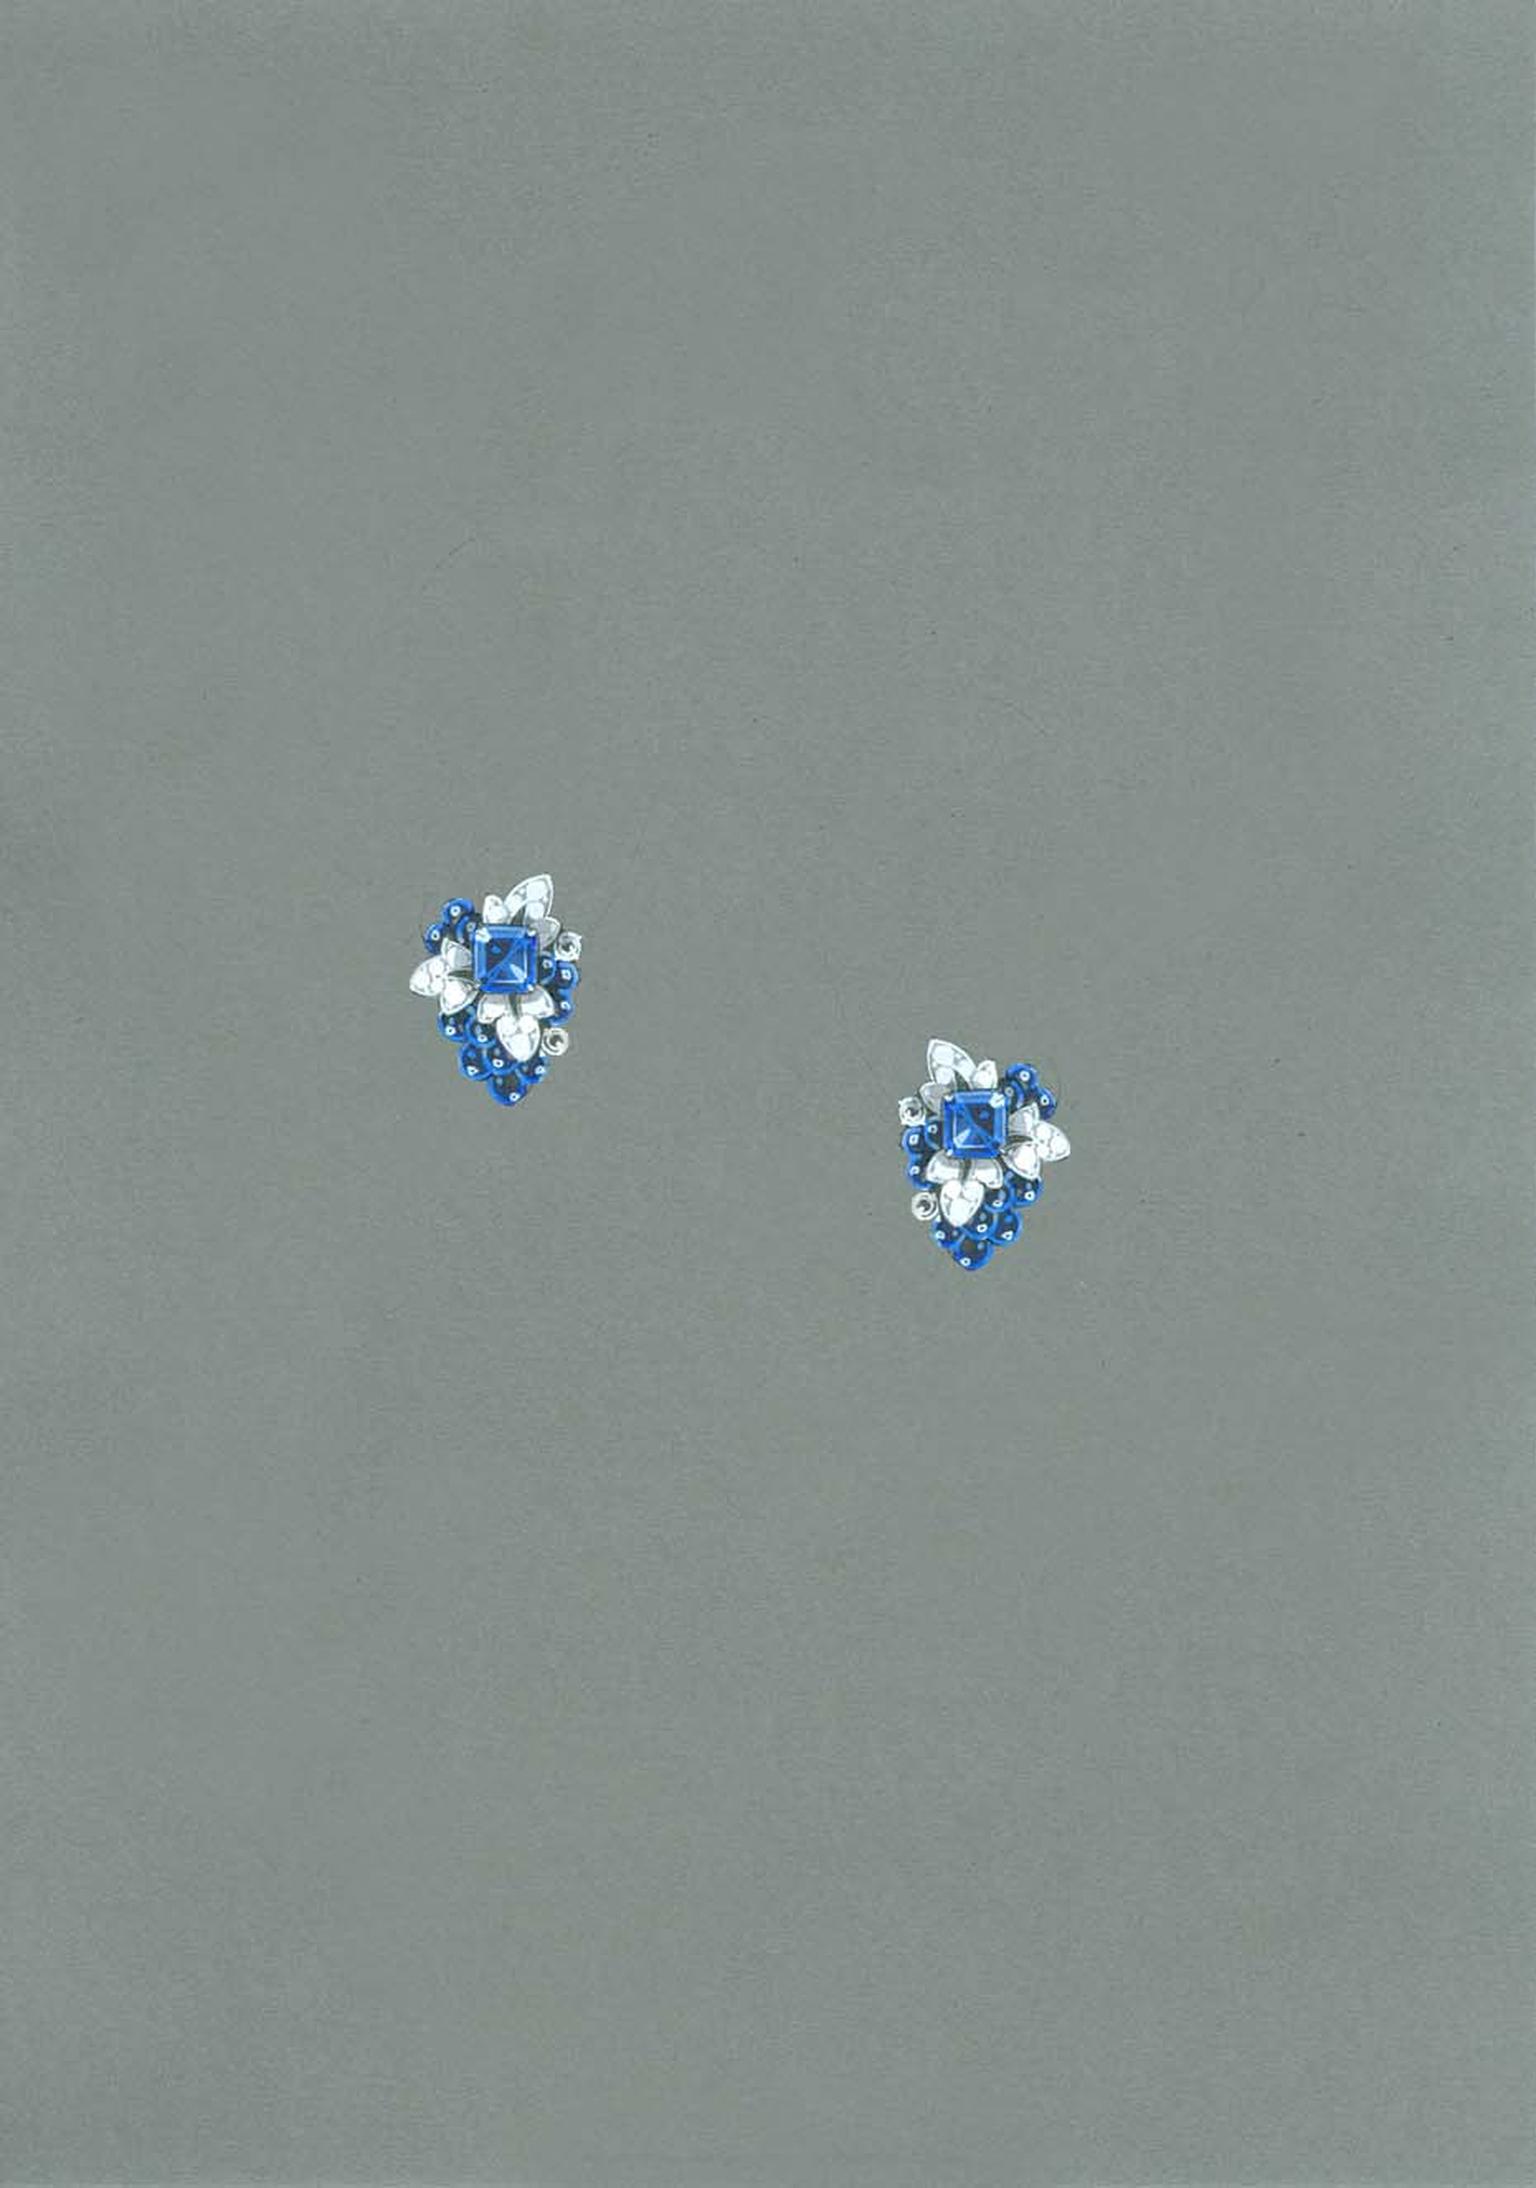 Graff earrings with sapphires and diamond pavé.